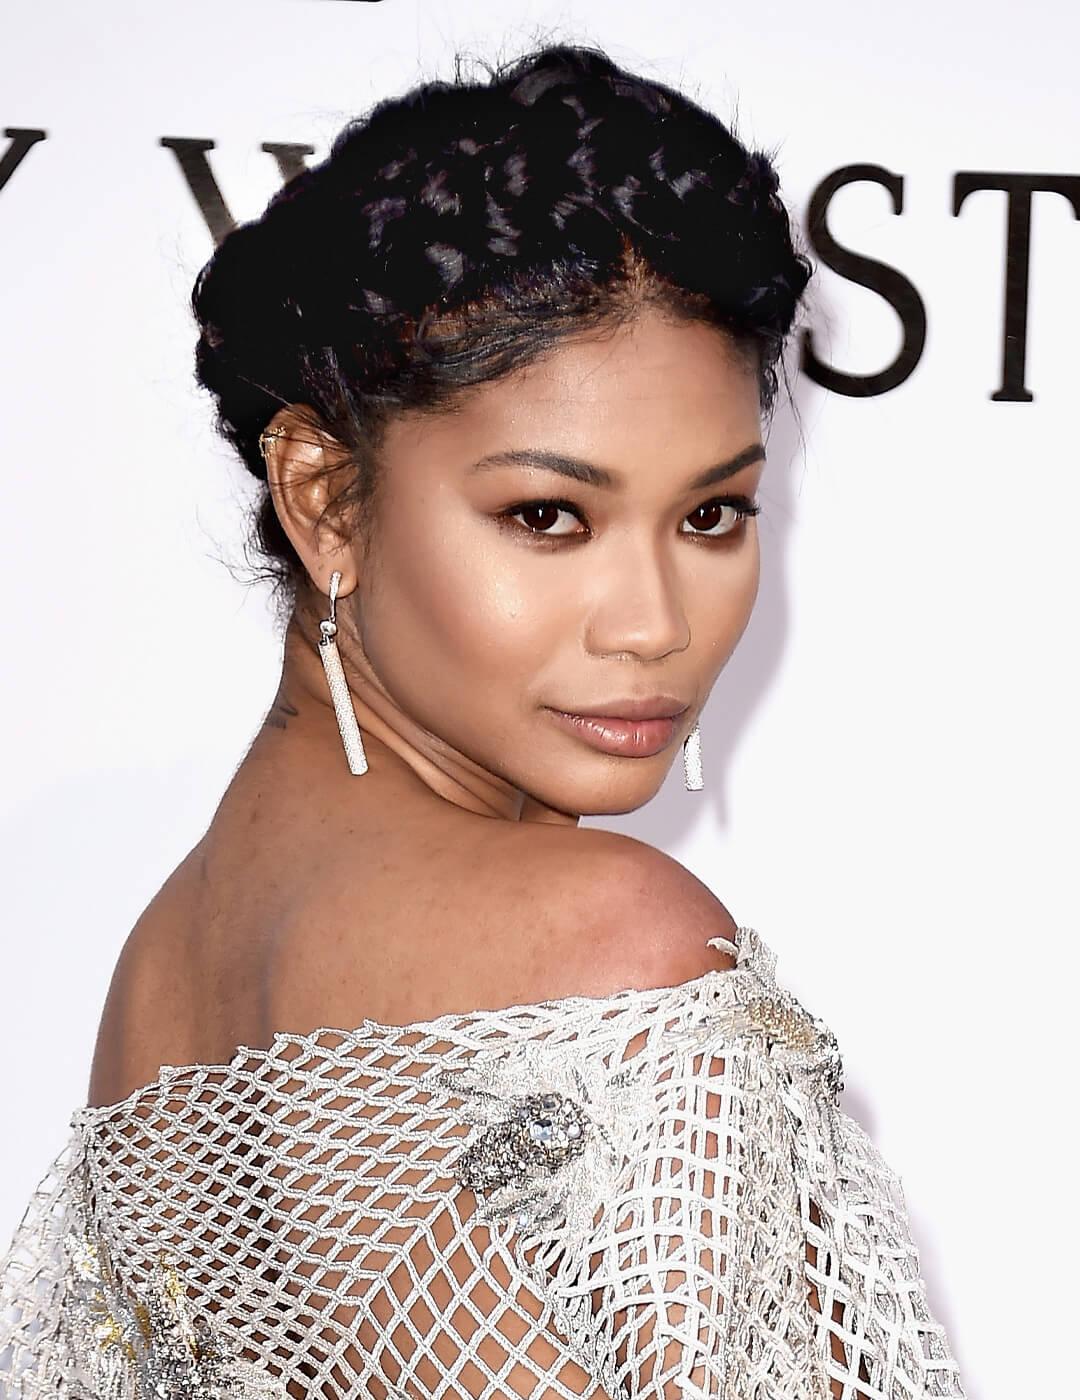 Close-up of Chanel Iman rocking a sultry makeup look, crown braids hairstyle, and a metallic fishnet dress embellished with rhinestones